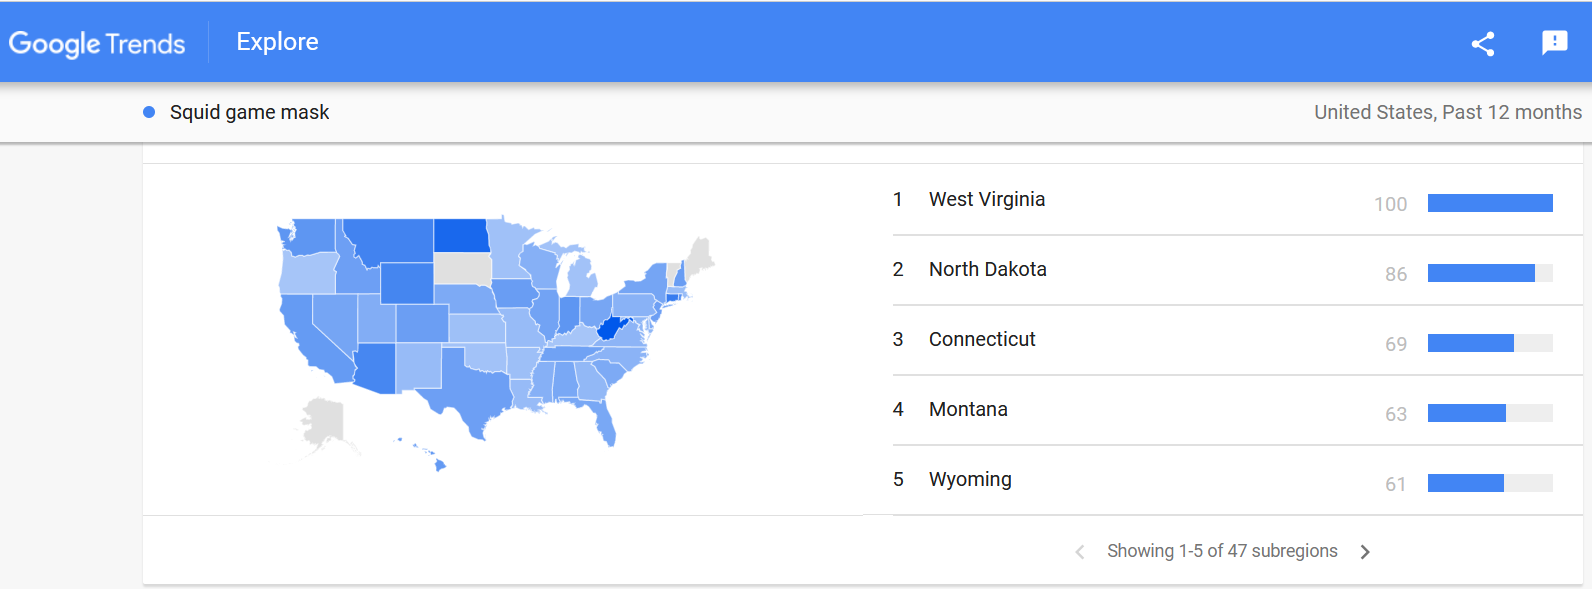 TOP 5 - Squid Game mask - google trends USA